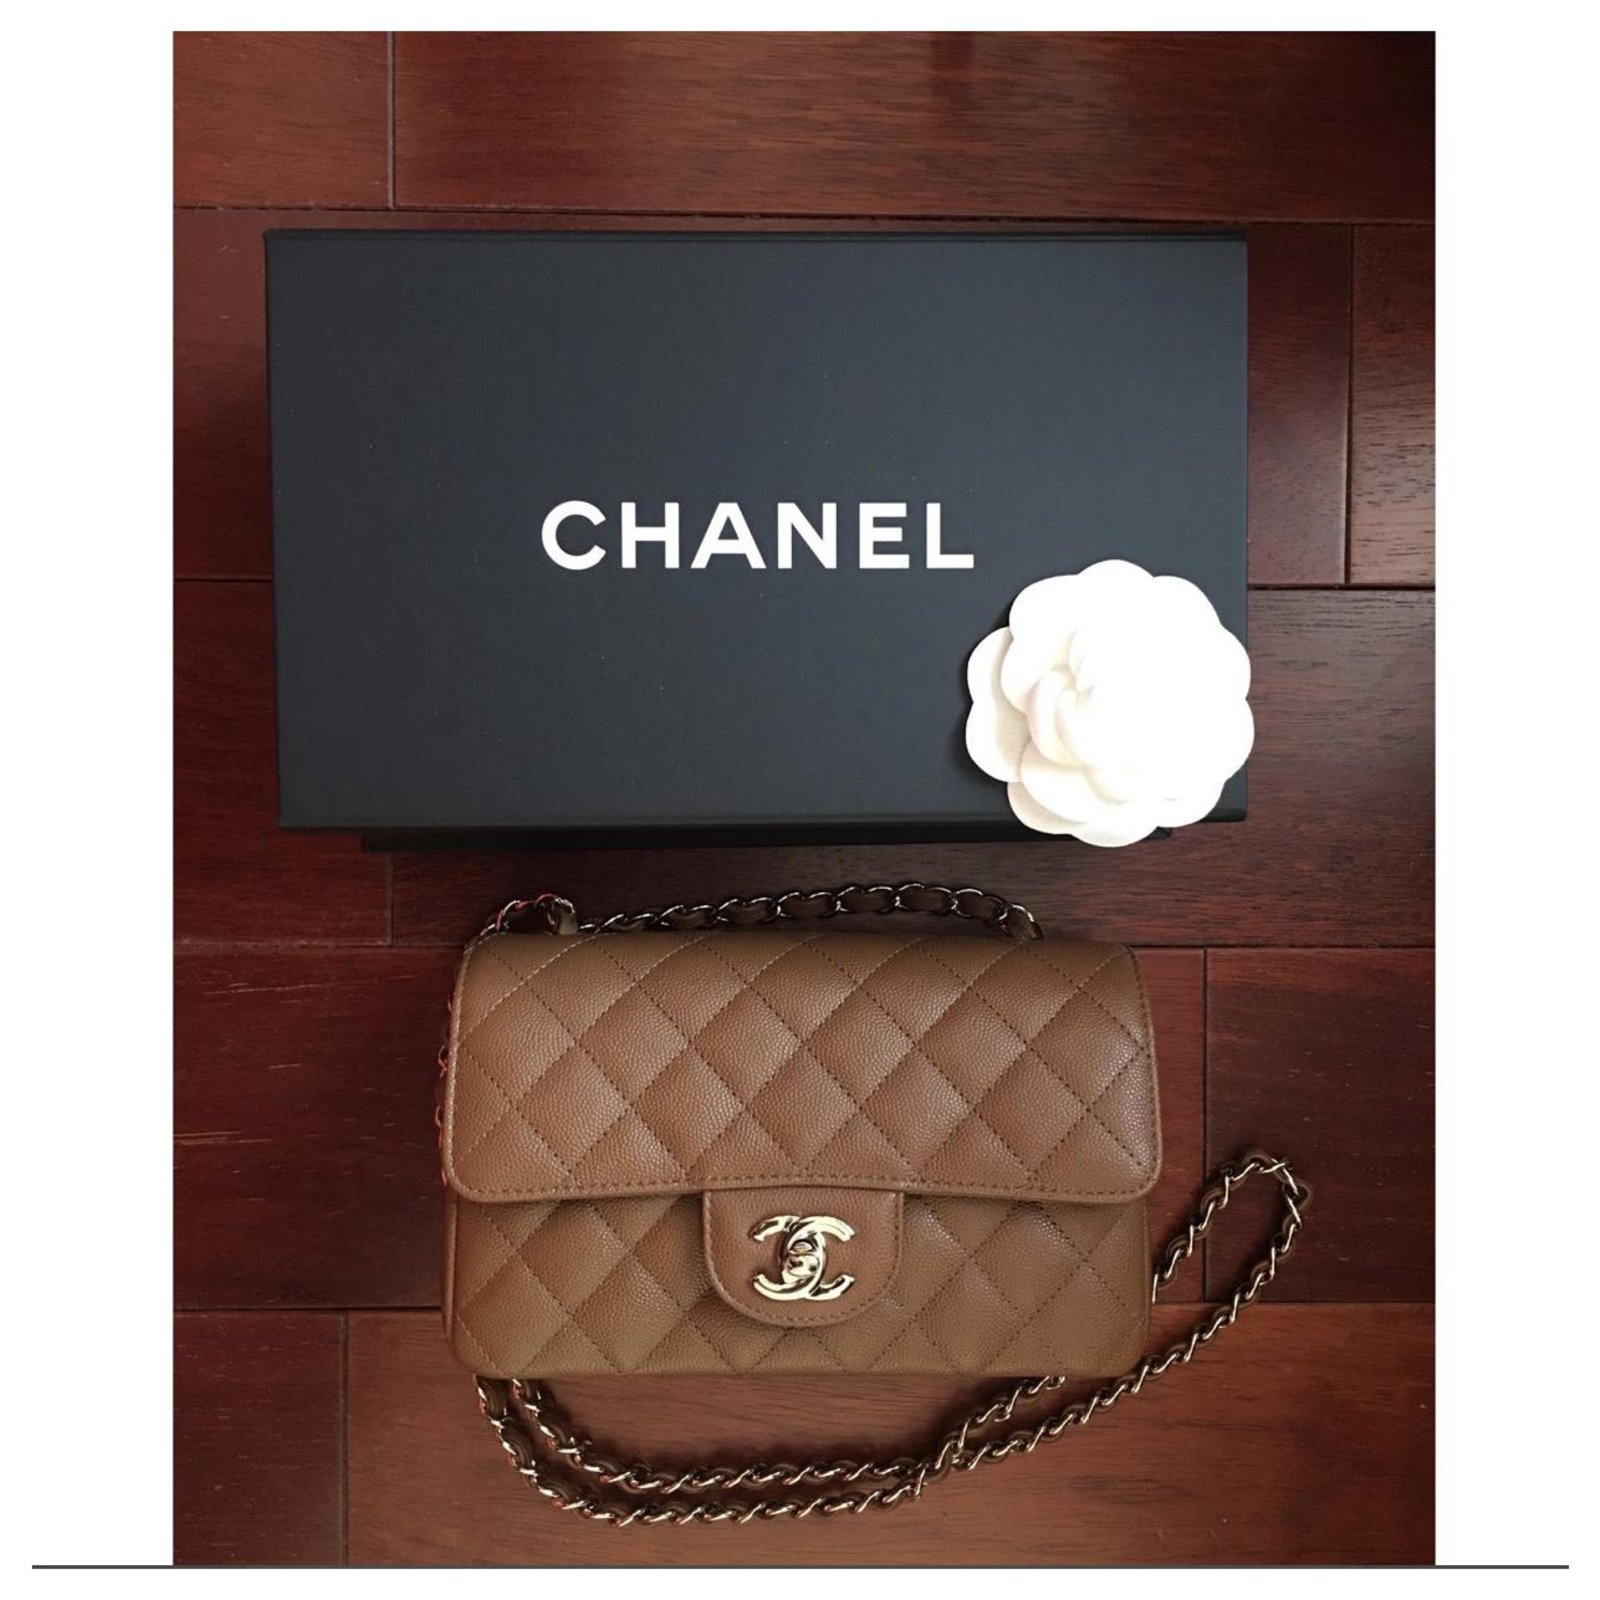 Chanel 19 Small Caramel Leather, Mixed Metal Hardware, New in Box